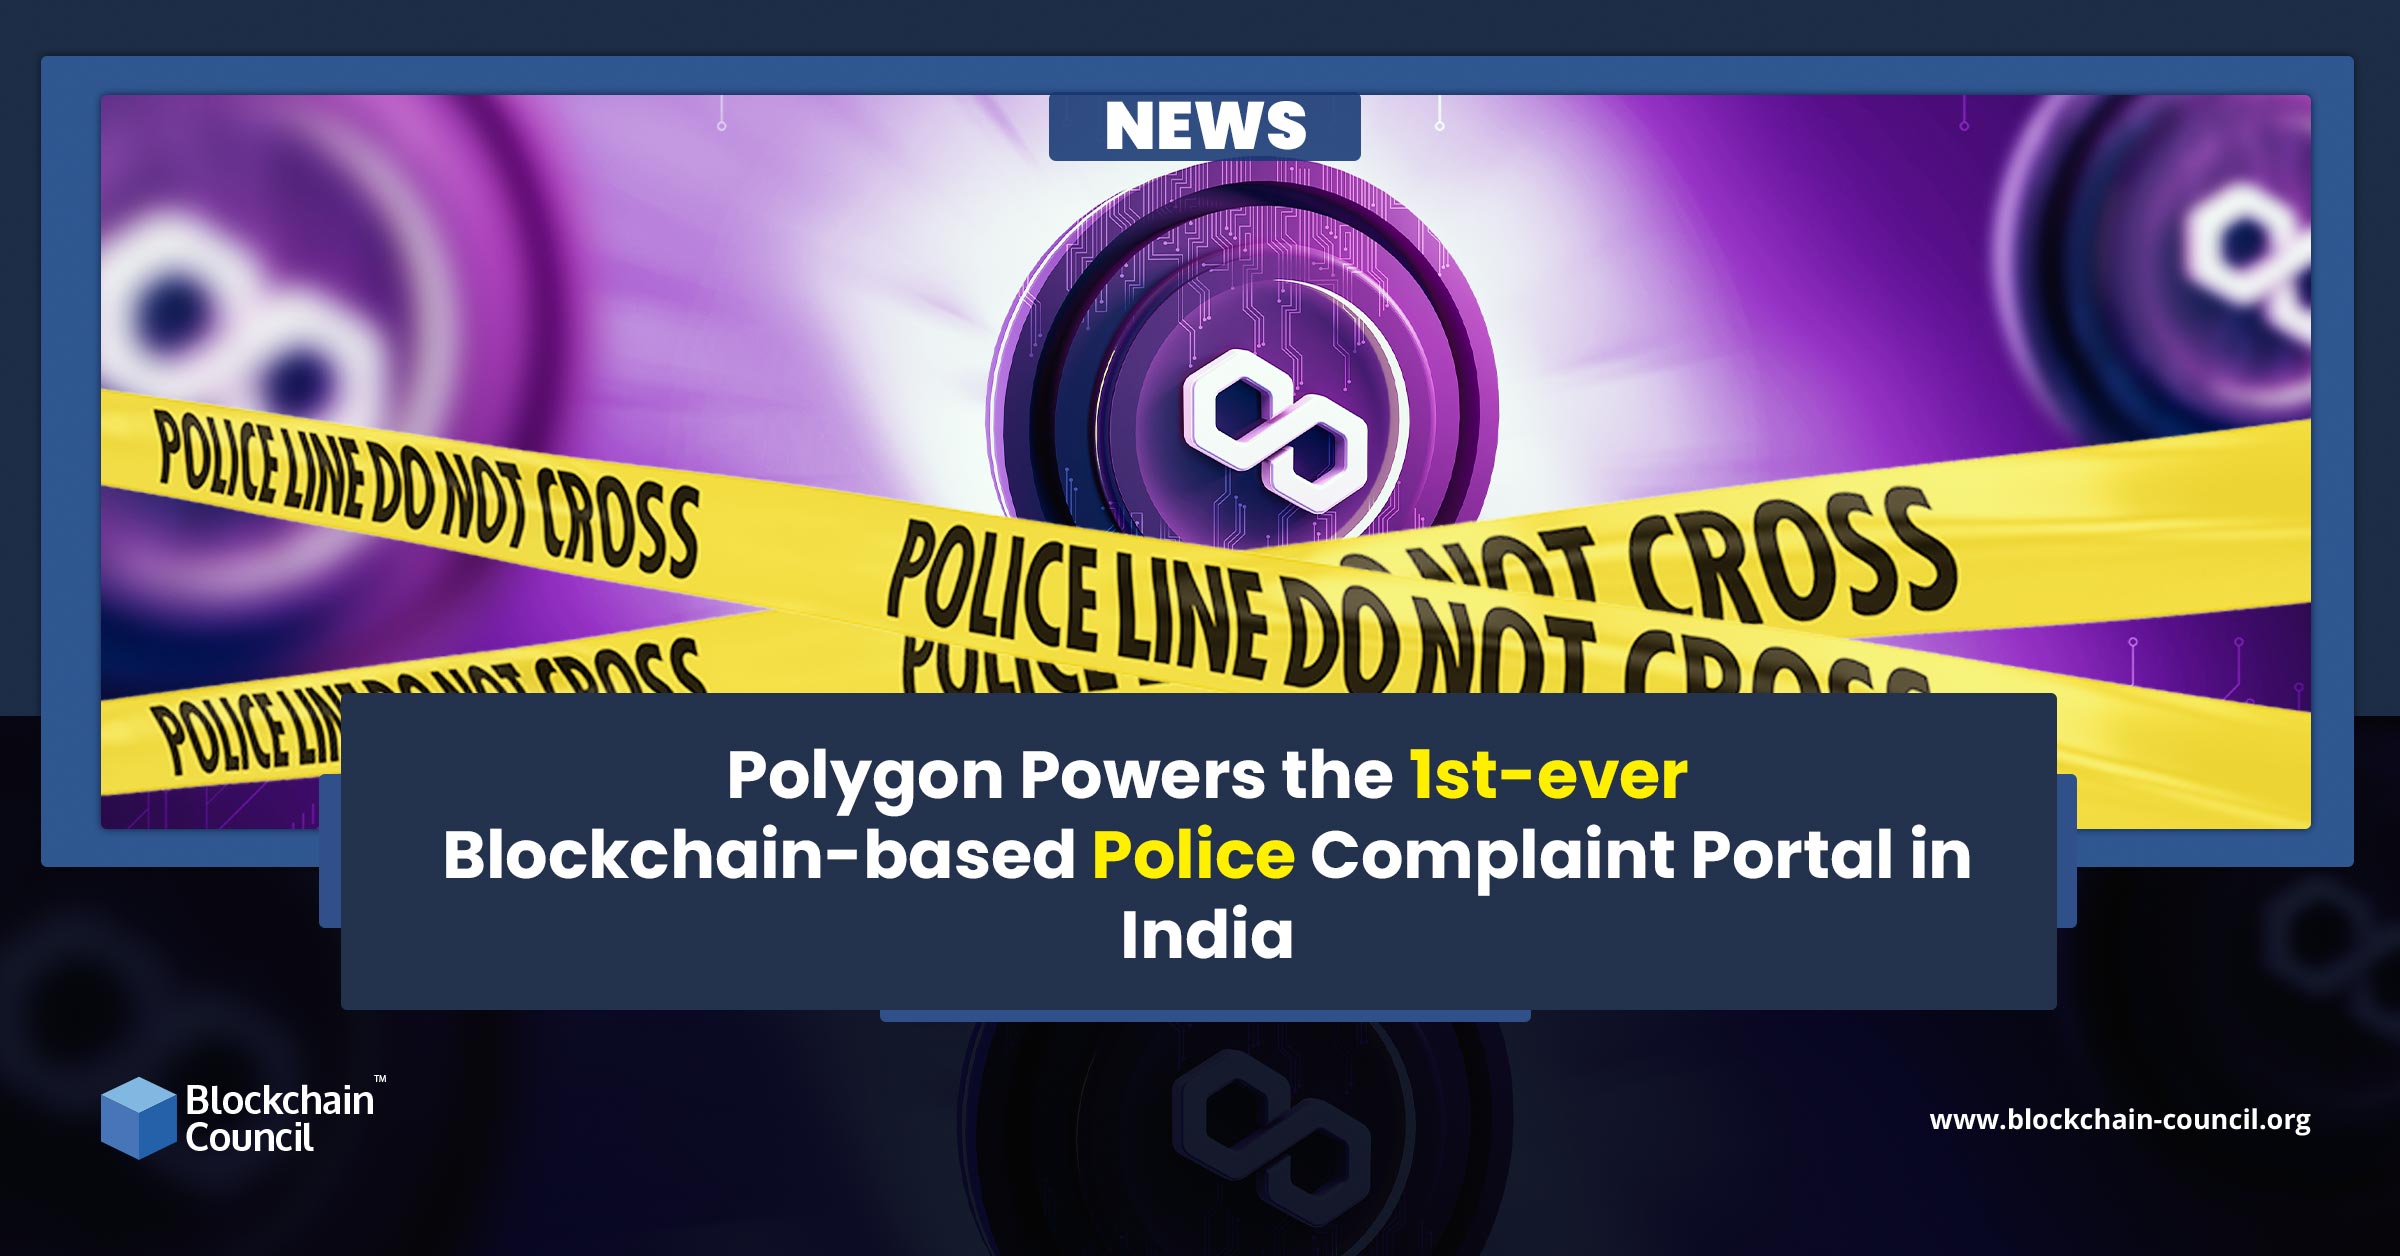 Polygon Powers the 1st-ever Blockchain-based Police Complaint Portal in India